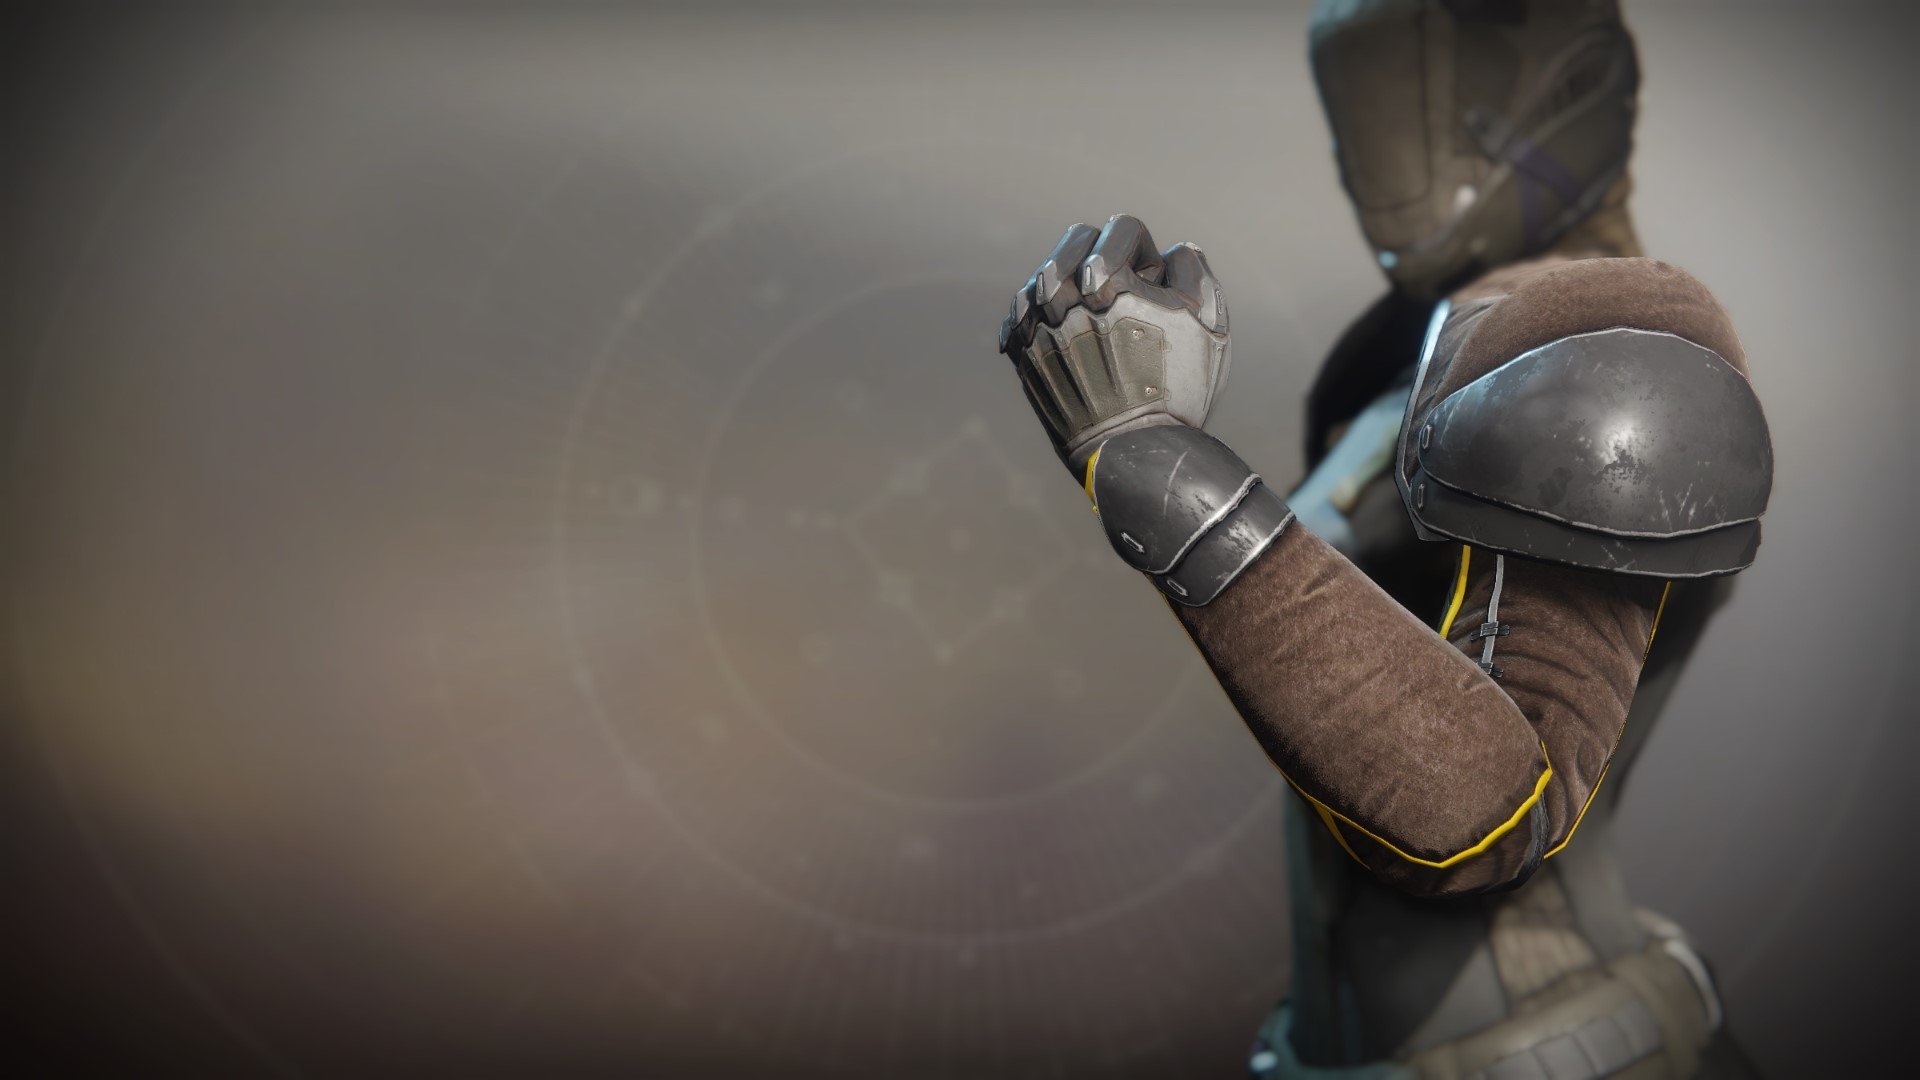 An in-game render of the Seventh Seraph Gauntlets.